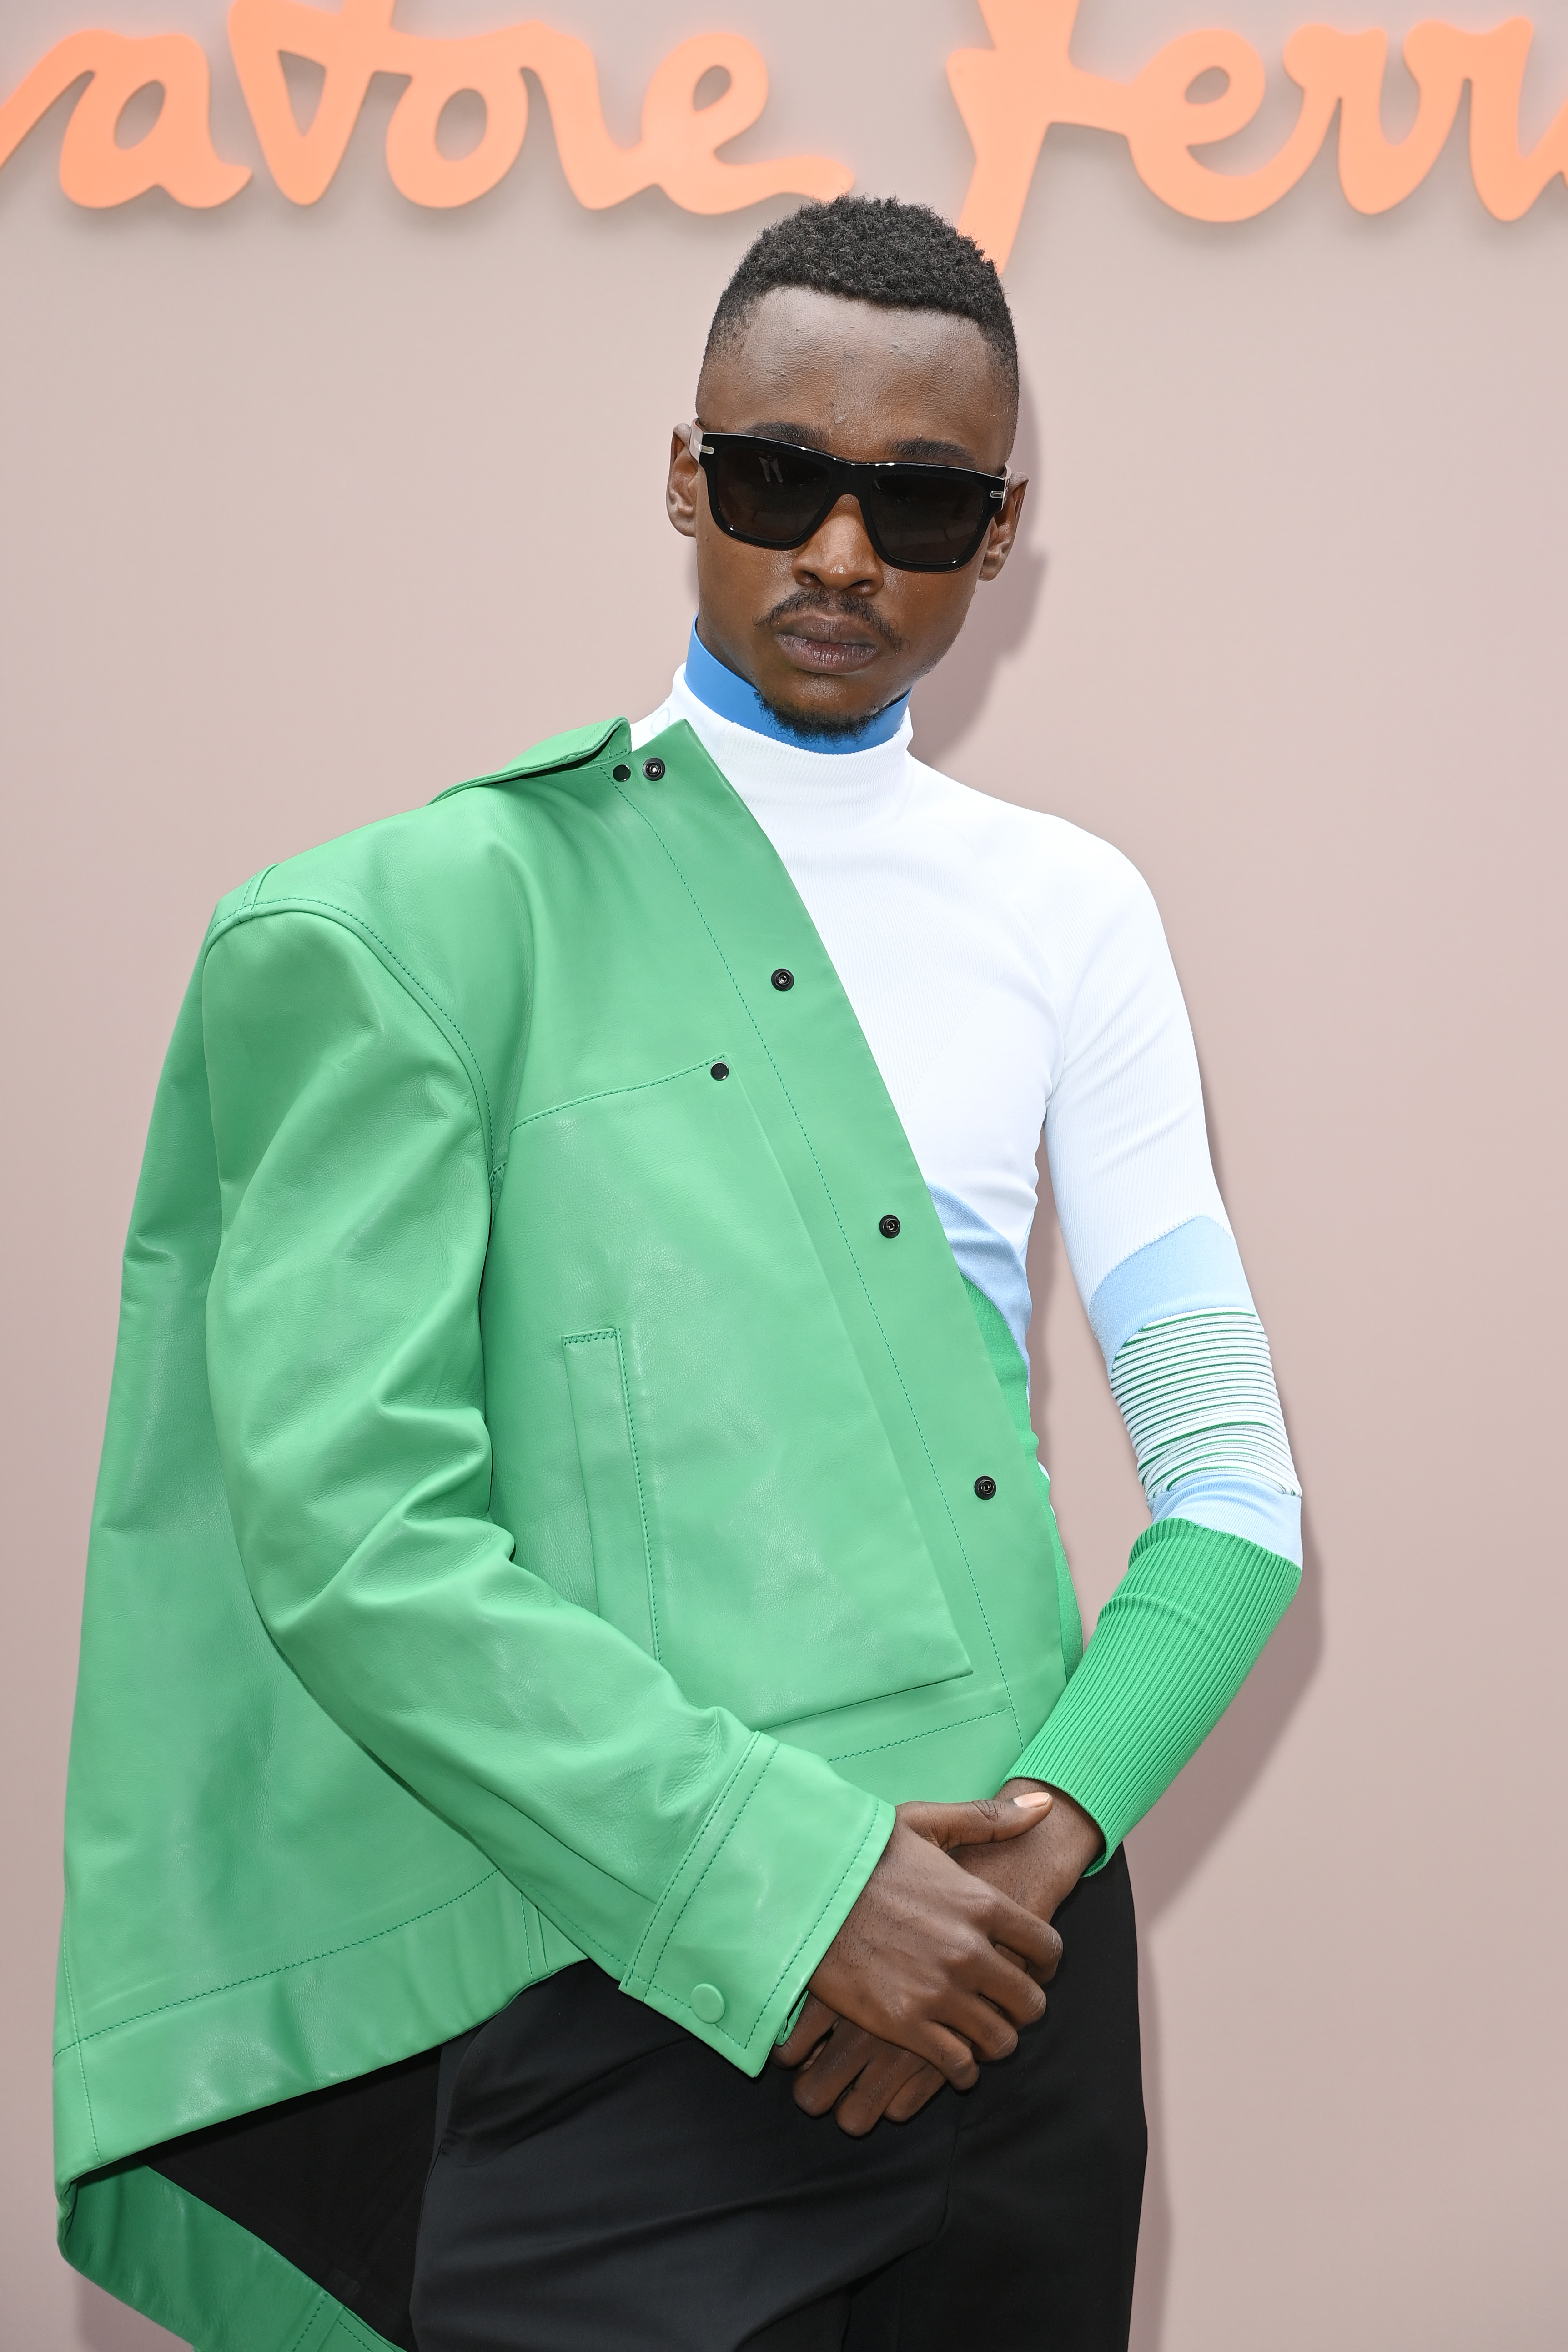 Ashton Sanders at the Salvatore Ferragamo Spring/Summer 2022 Show on September 25, 2021, in Milan | Source: Getty Images